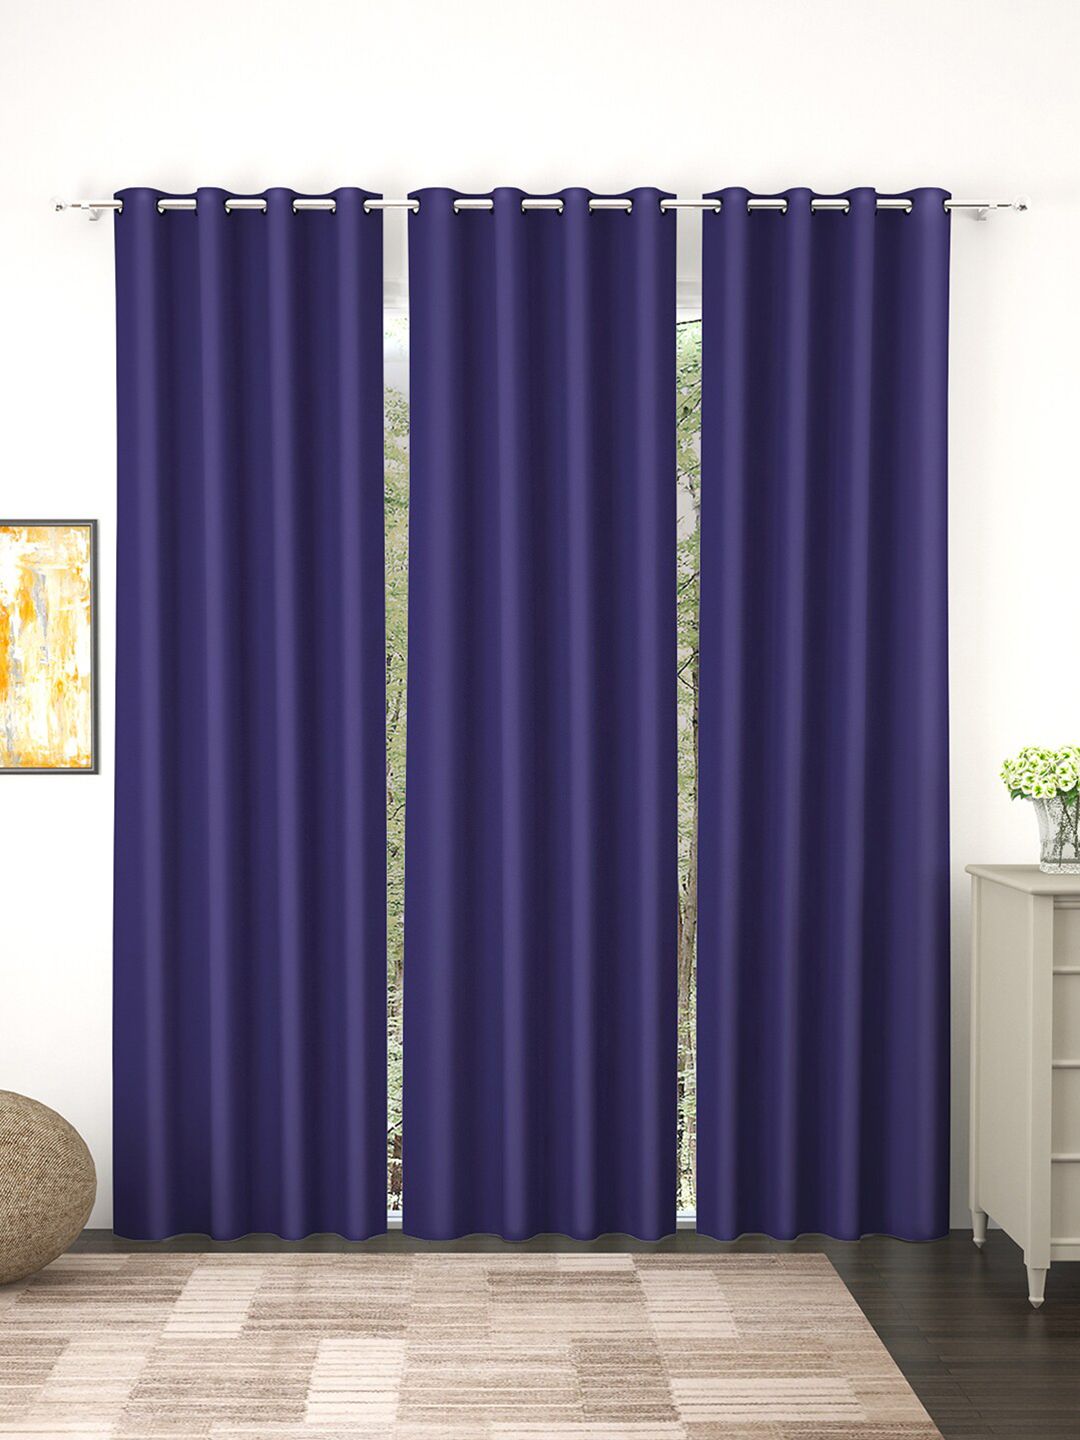 Story@home Violet Solid Set of 3 Black Out 7 Feet Door Curtain Price in India